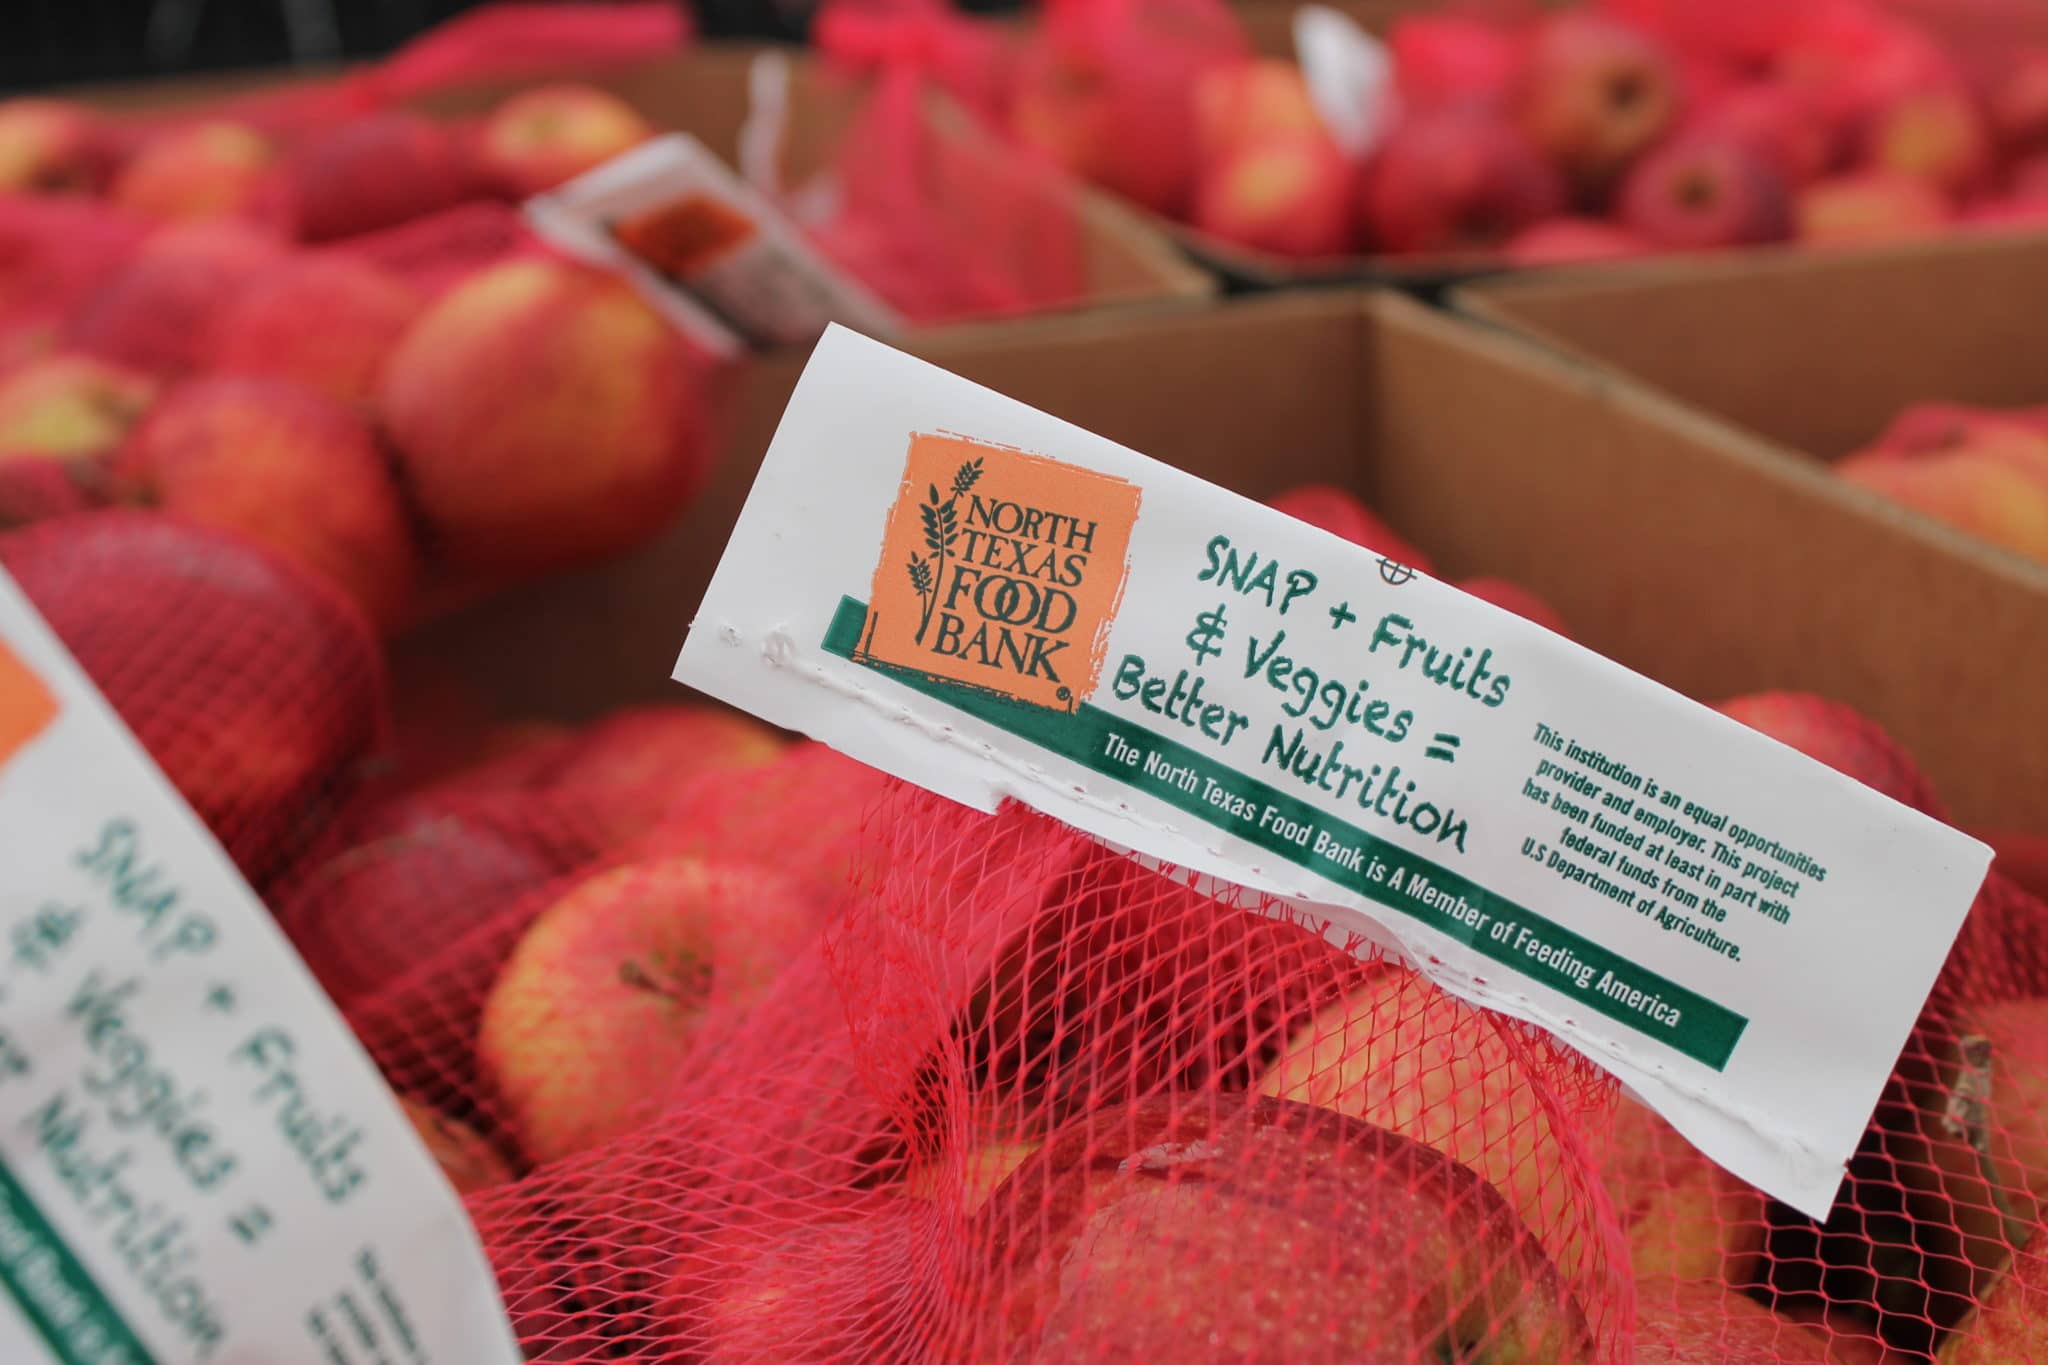 Bags of SNAP produce with the North Texas Food Bank logo